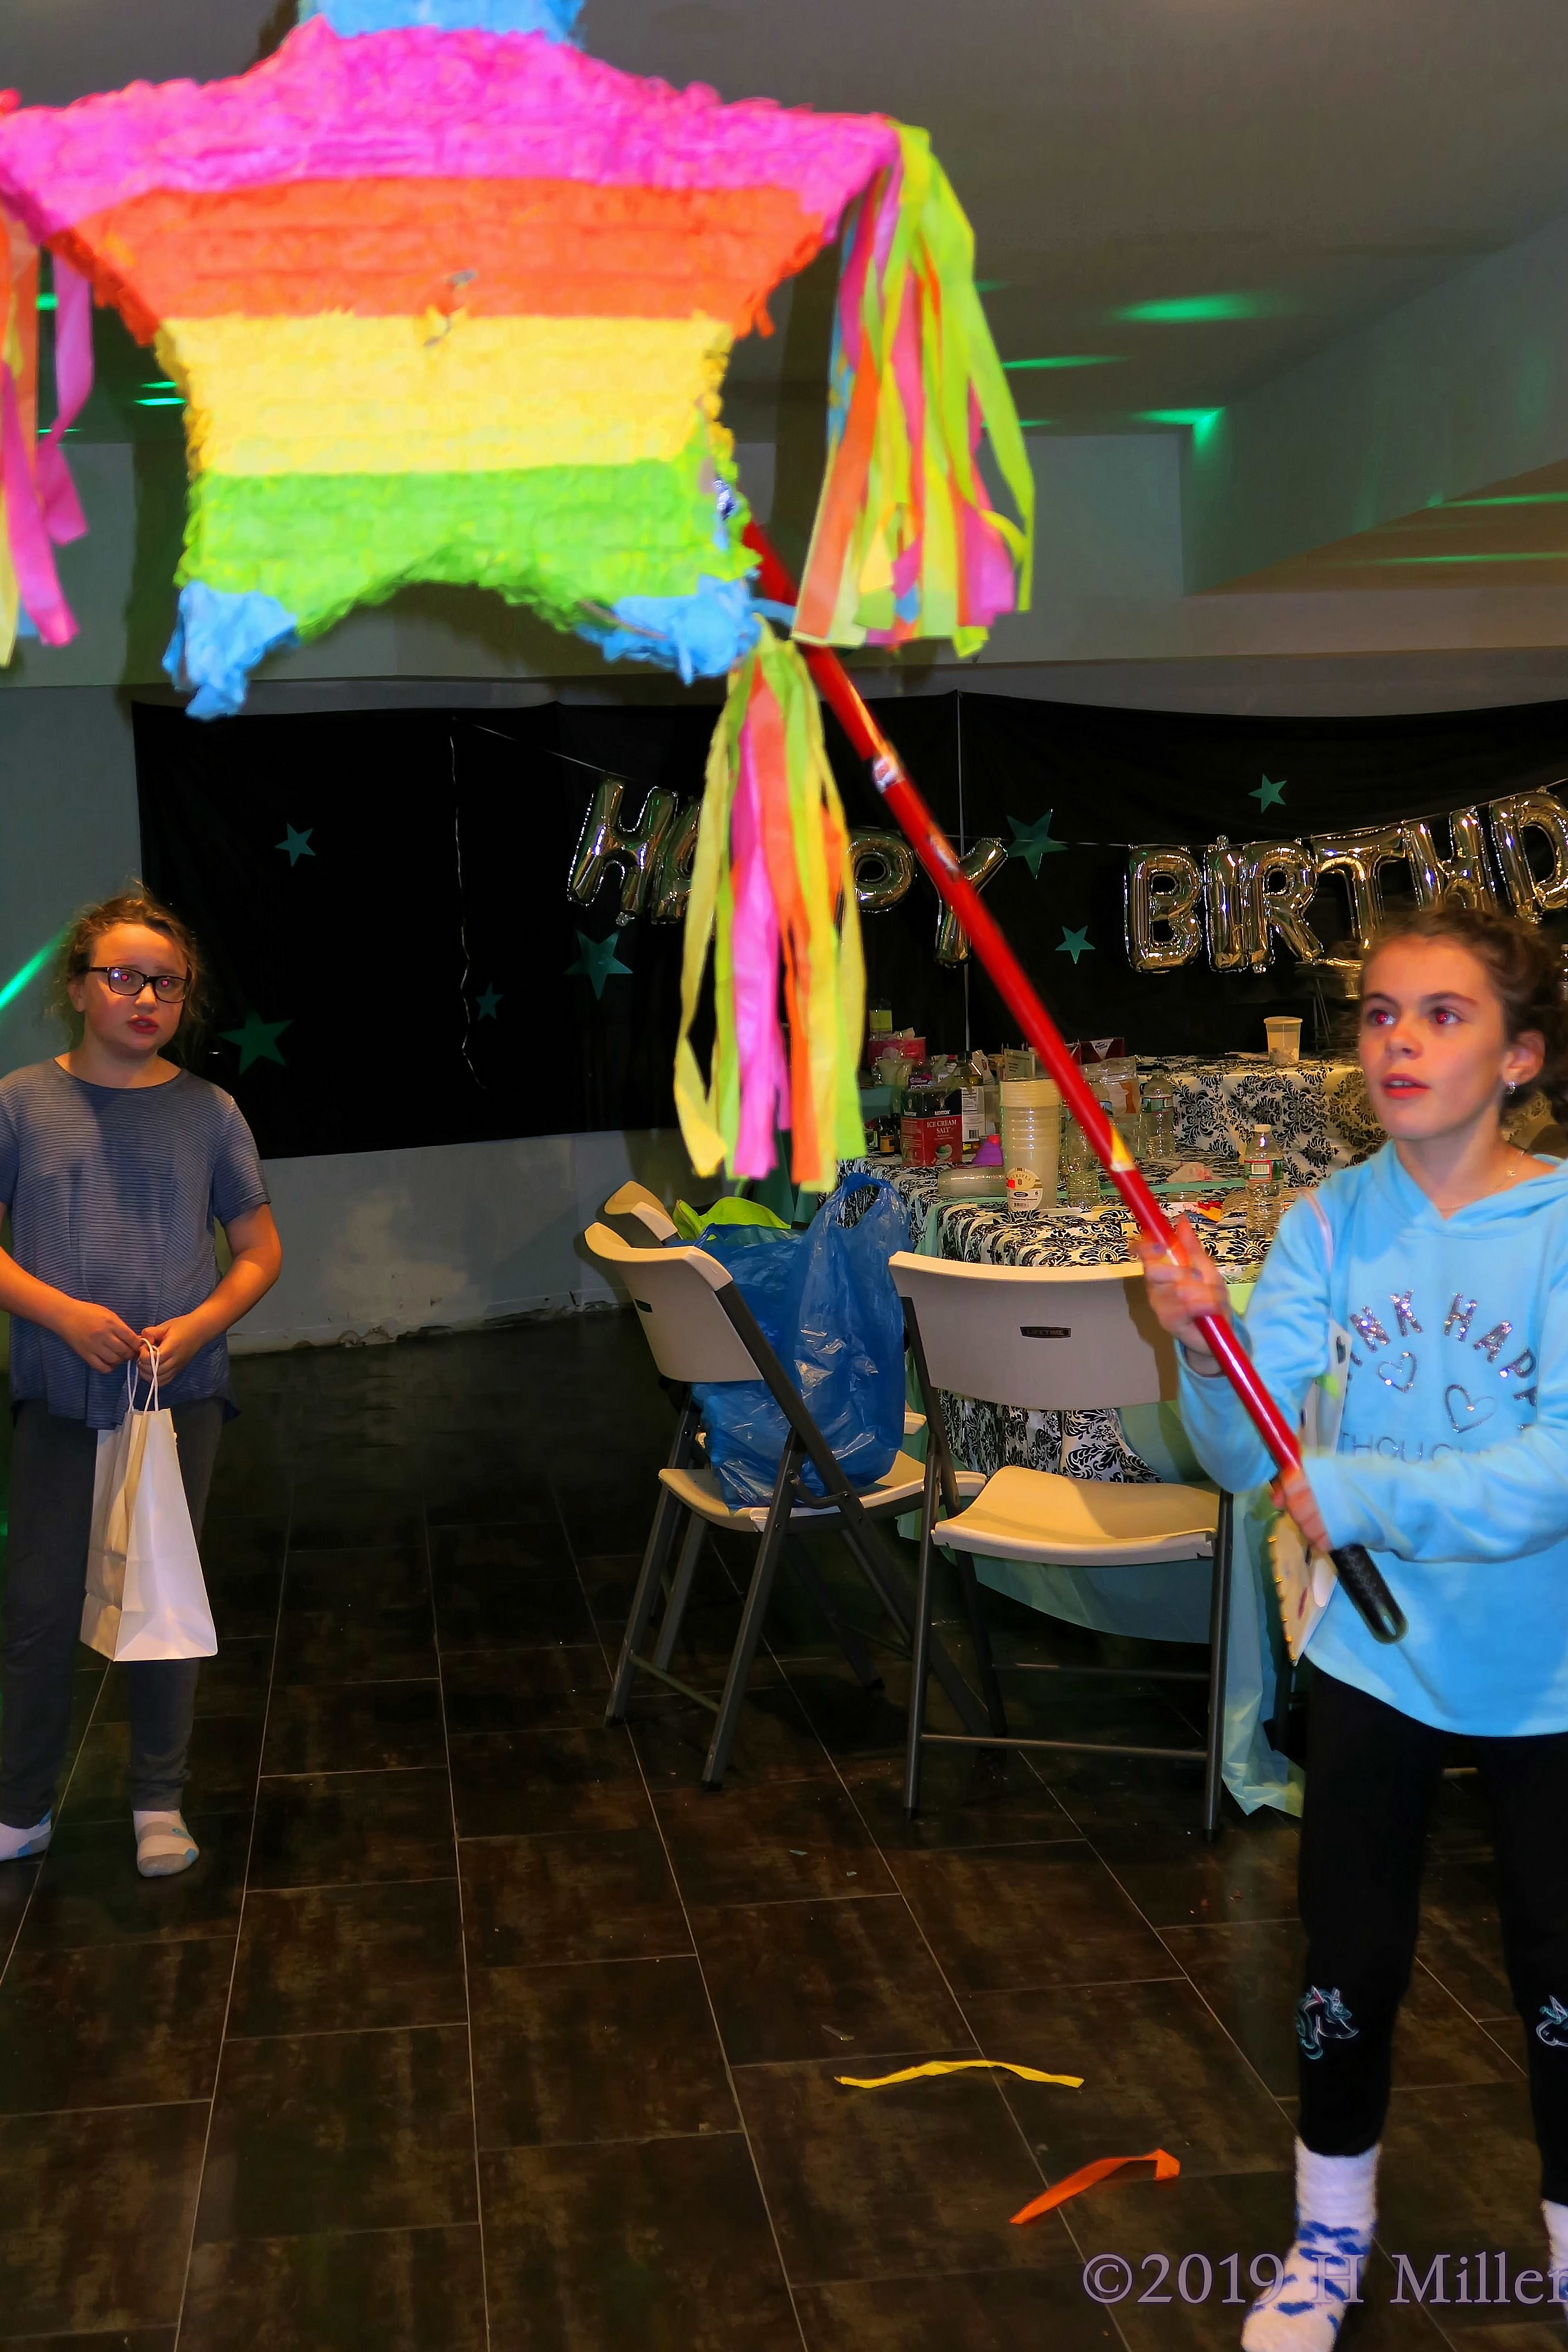 Sticking The Stickler! Kids Pinata Fun At The Kids Spa Party! 4